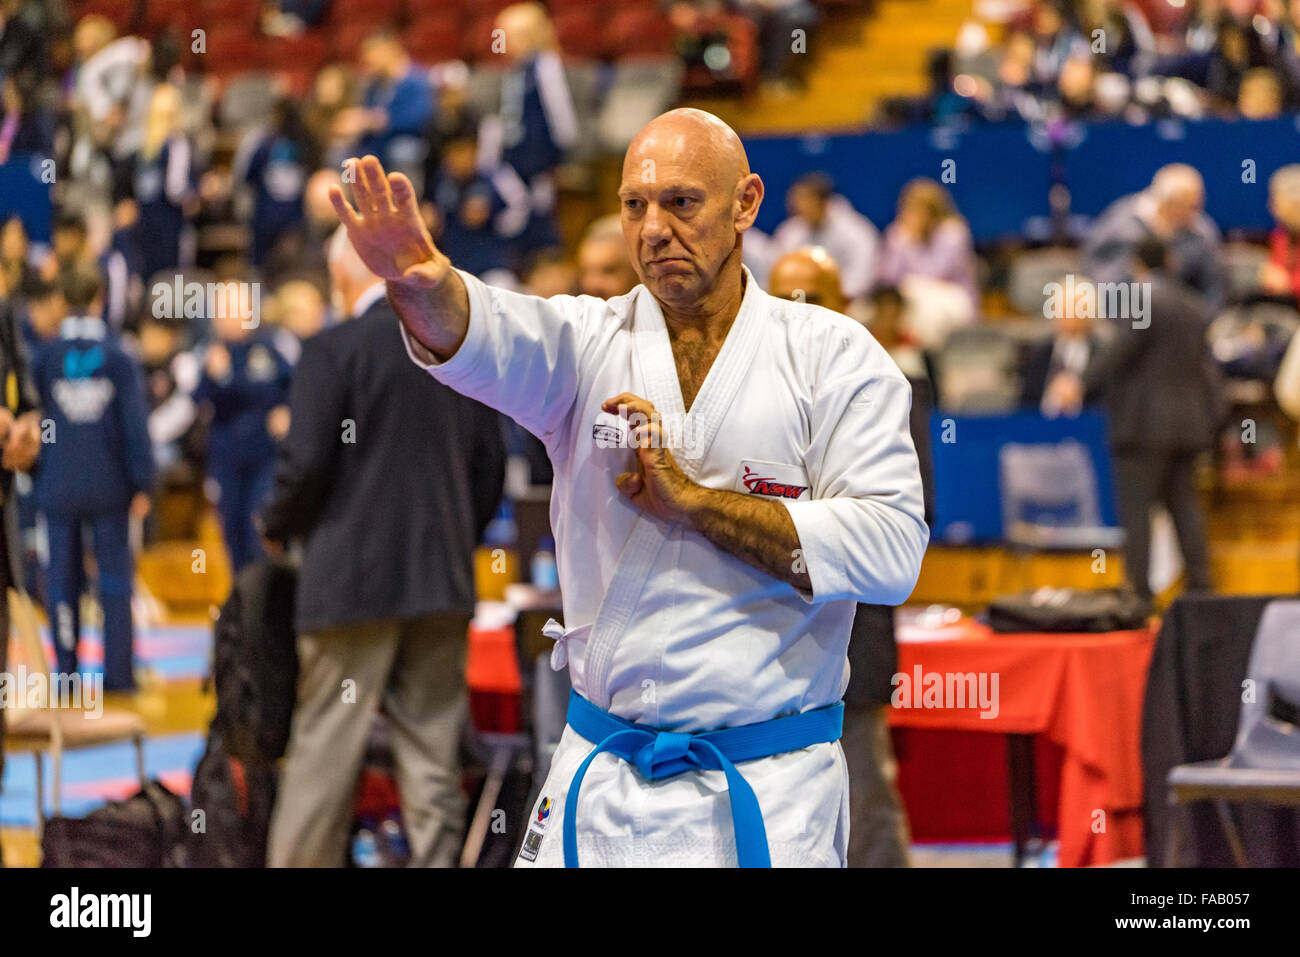 AKF National Karate Championship in Adelaide, South Australia Stock Photo